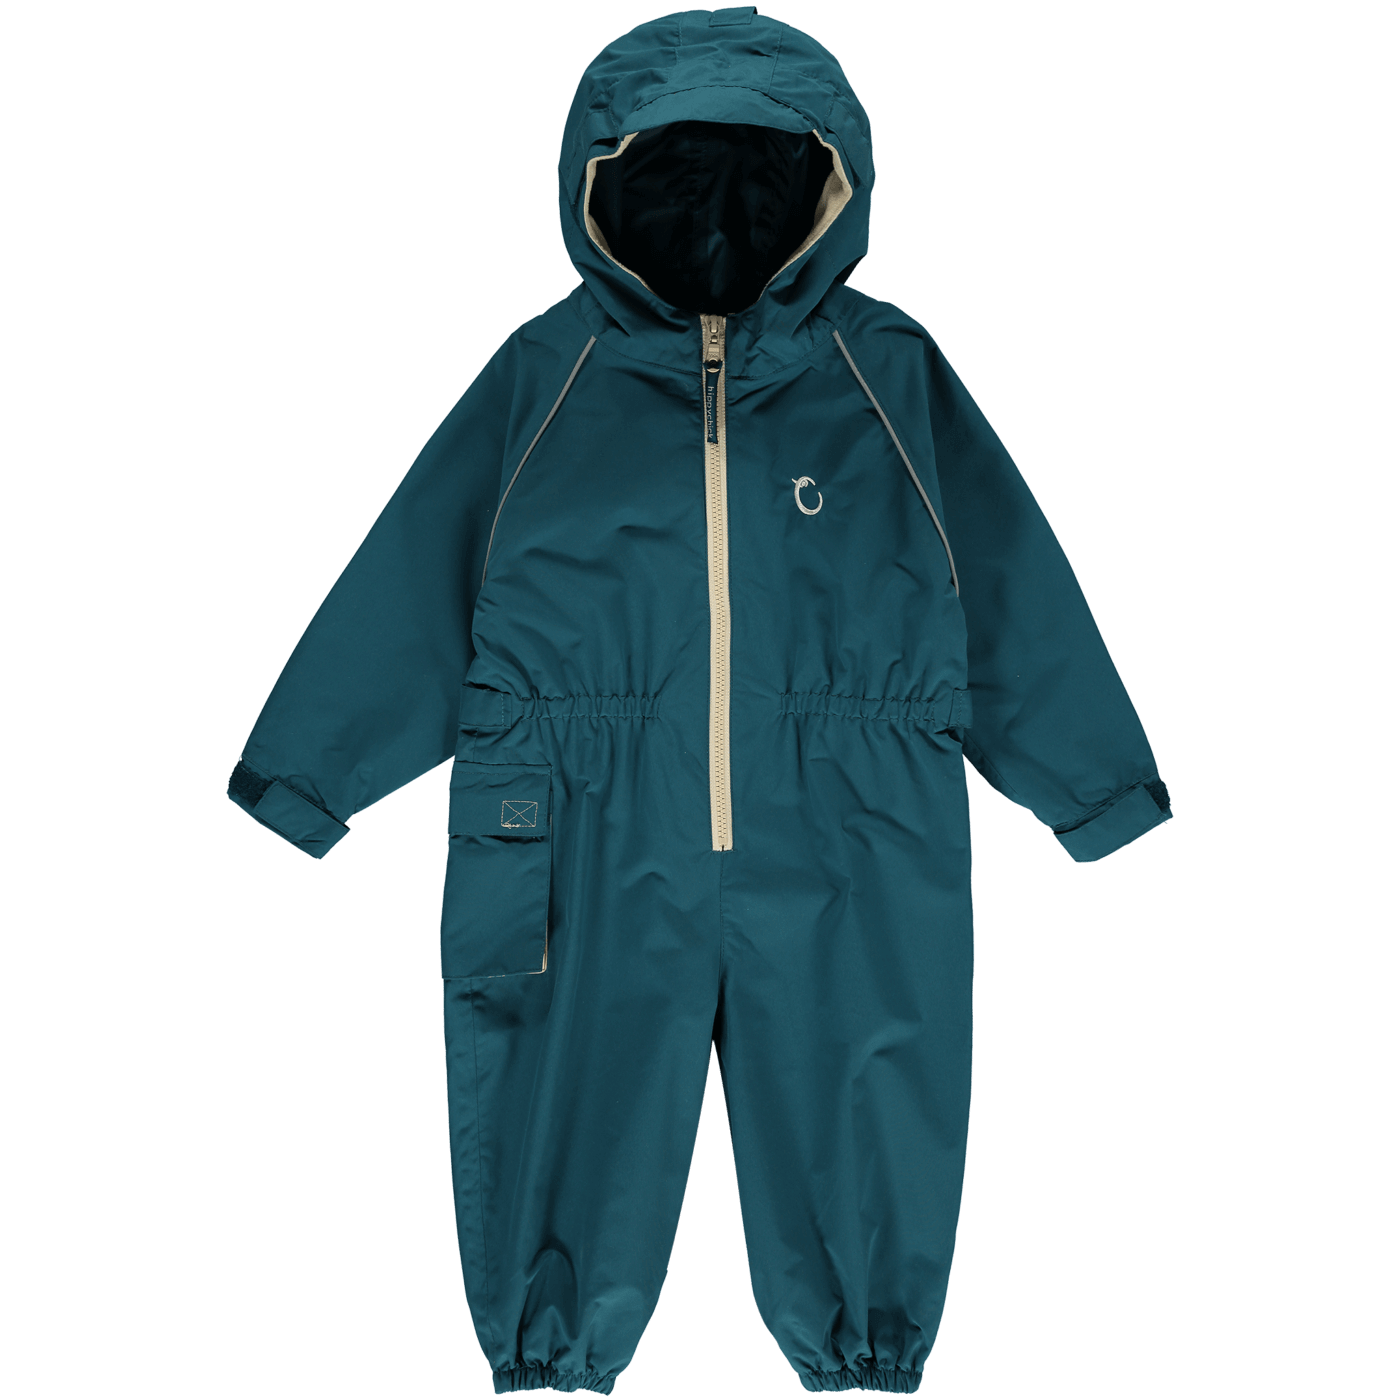 The Hippychick All In One Waterproof toddler suits are 100% waterproof, windproof, lightweight and breathable, ensuring complete comfort and protection.